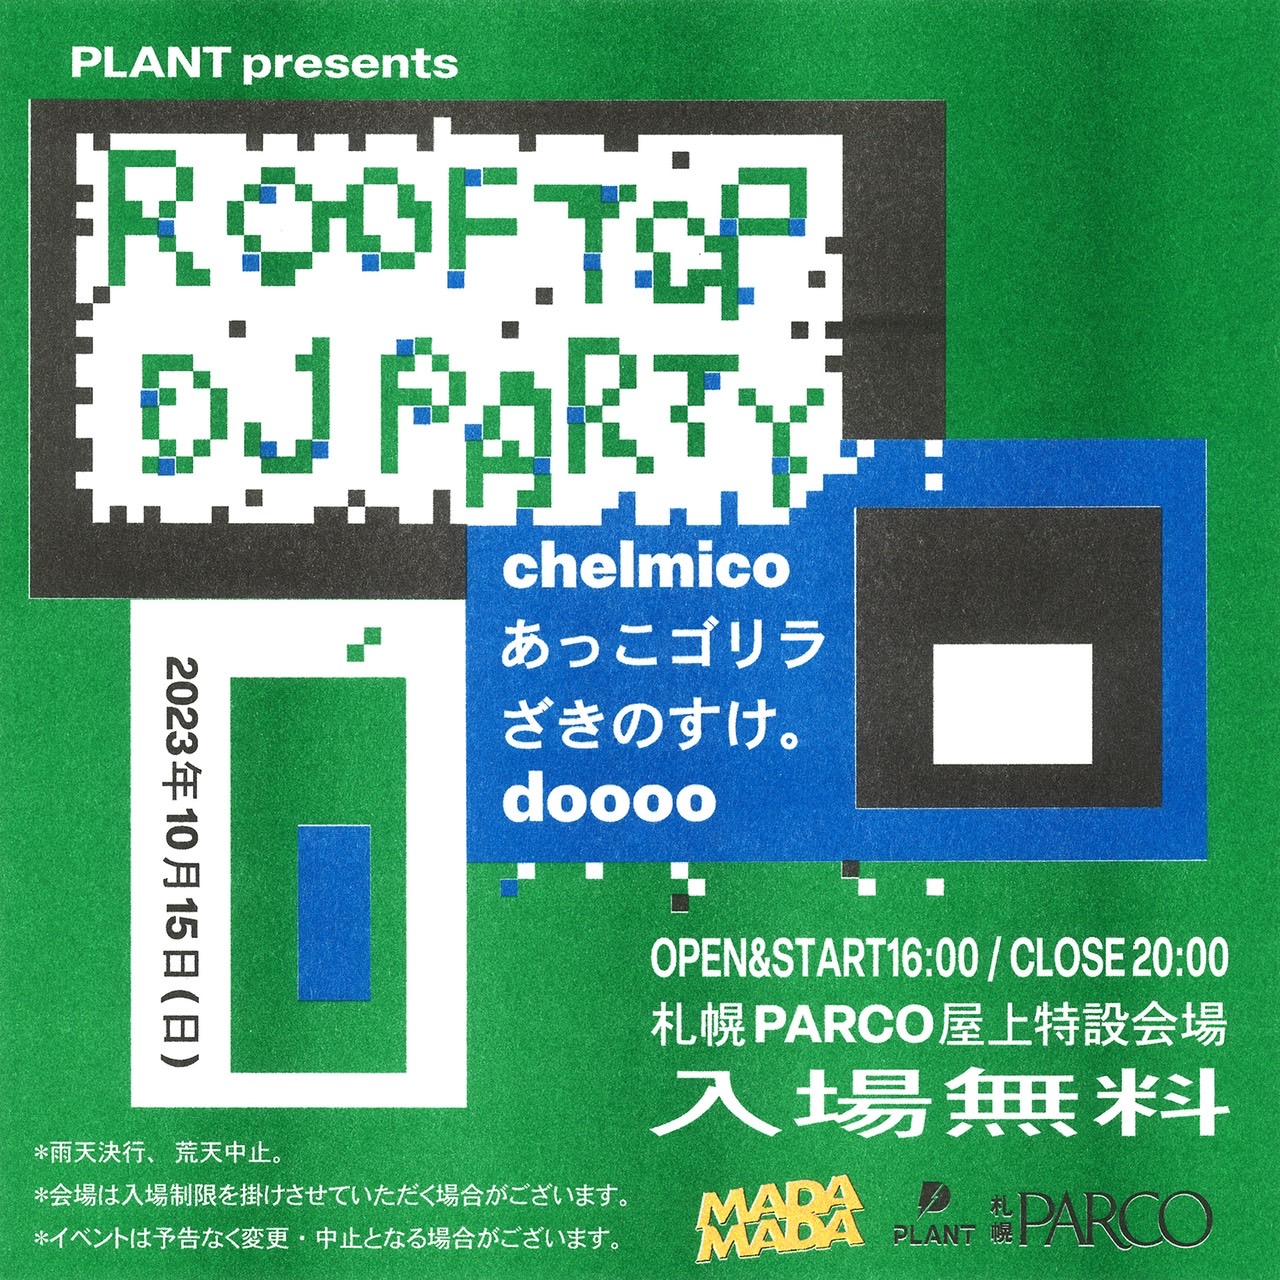 10/15 PLANT presents 「ROOFTOP DJ PARTY」出演決定！